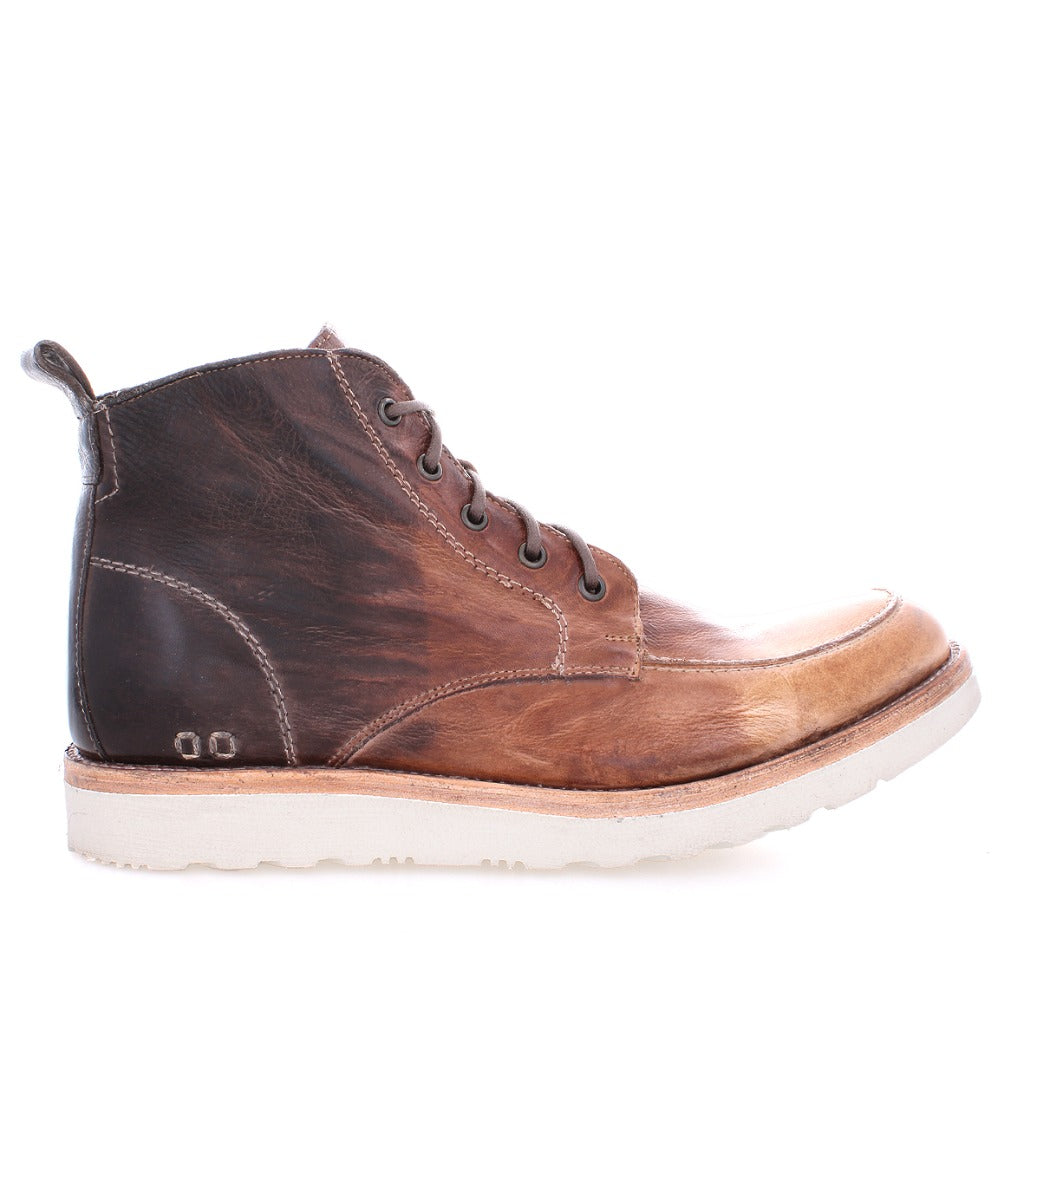 A single Bed Stu men's Lincoln leather boot with laces on a white background.